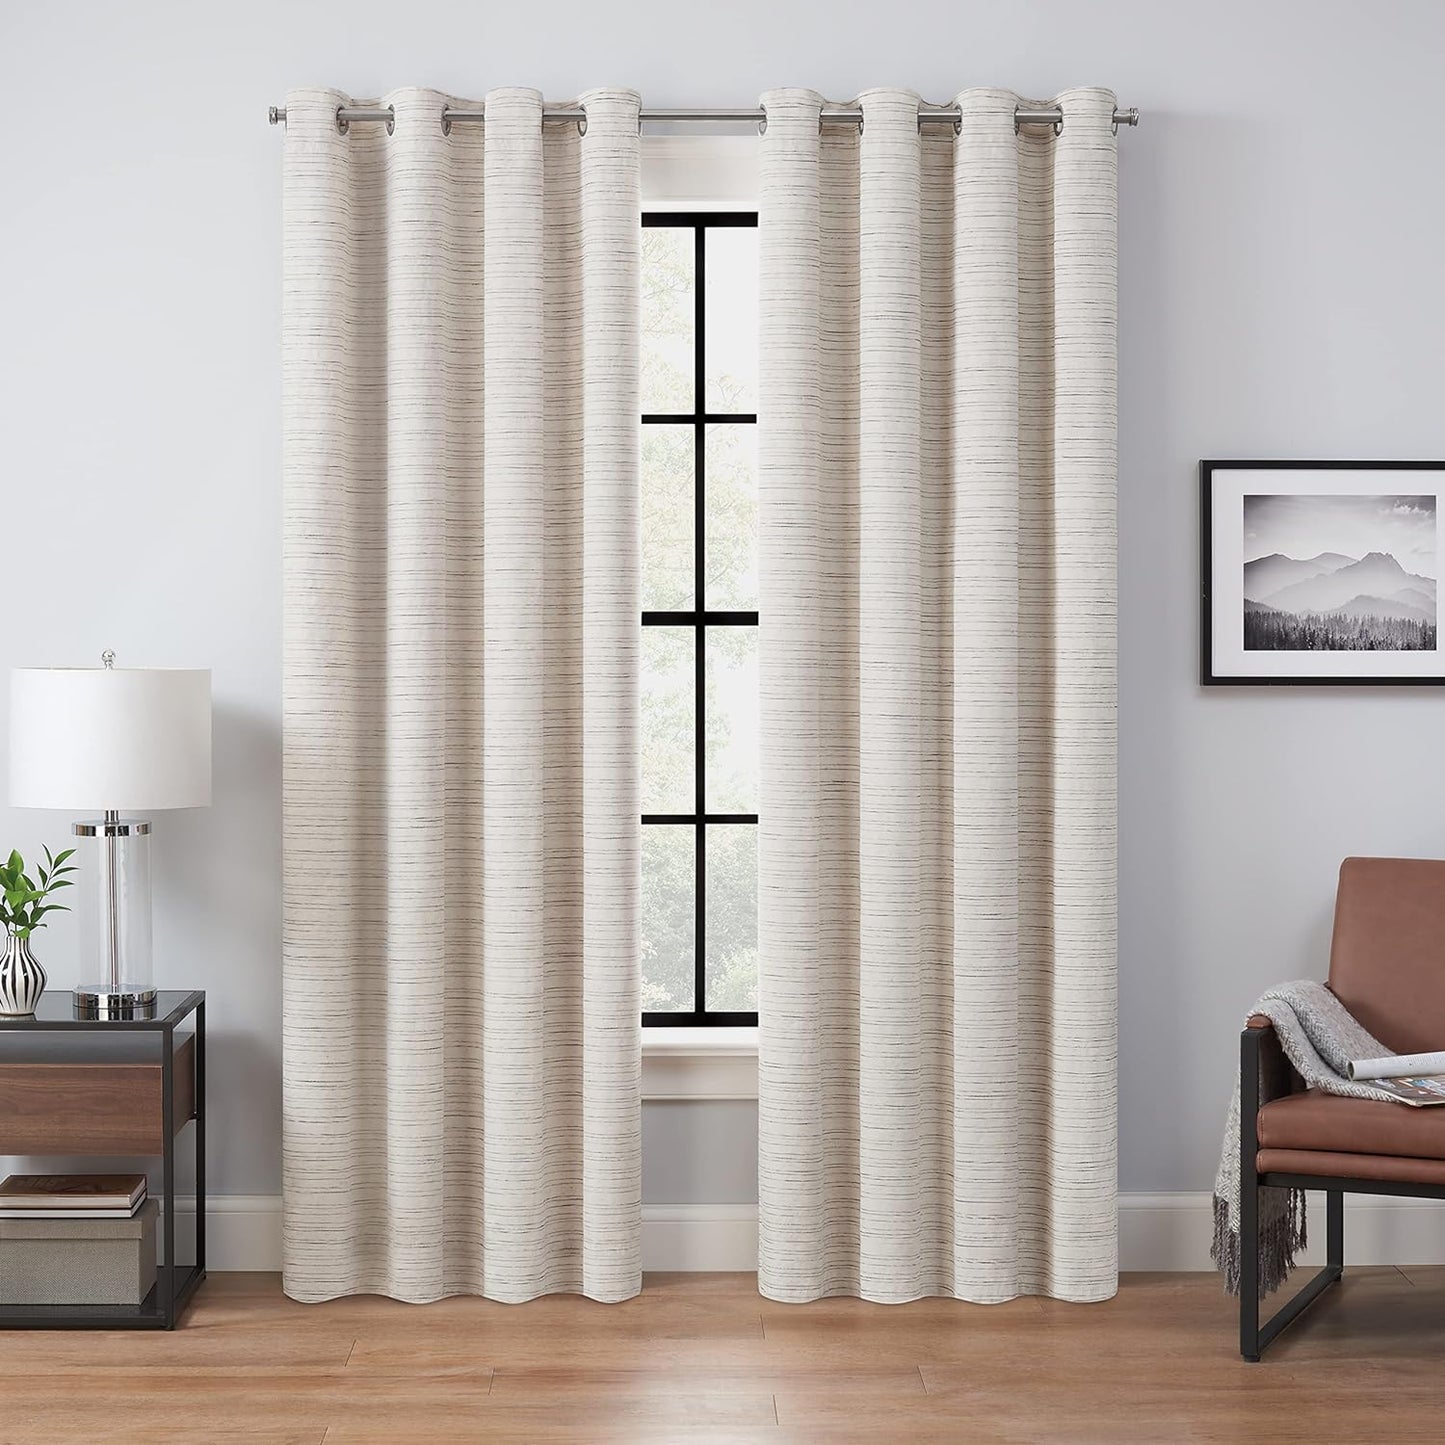 Eclipse Cannes Magnitech 100% Blackout Curtain, Rod Pocket Window Curtain Panel, Seamless Magnetic Closure for Bedroom, Living Room or Nursery, 63 in Long X 40 in Wide, (1 Panel), Natural/ Linen  KEECO Ivory Melange Grommet 50X63